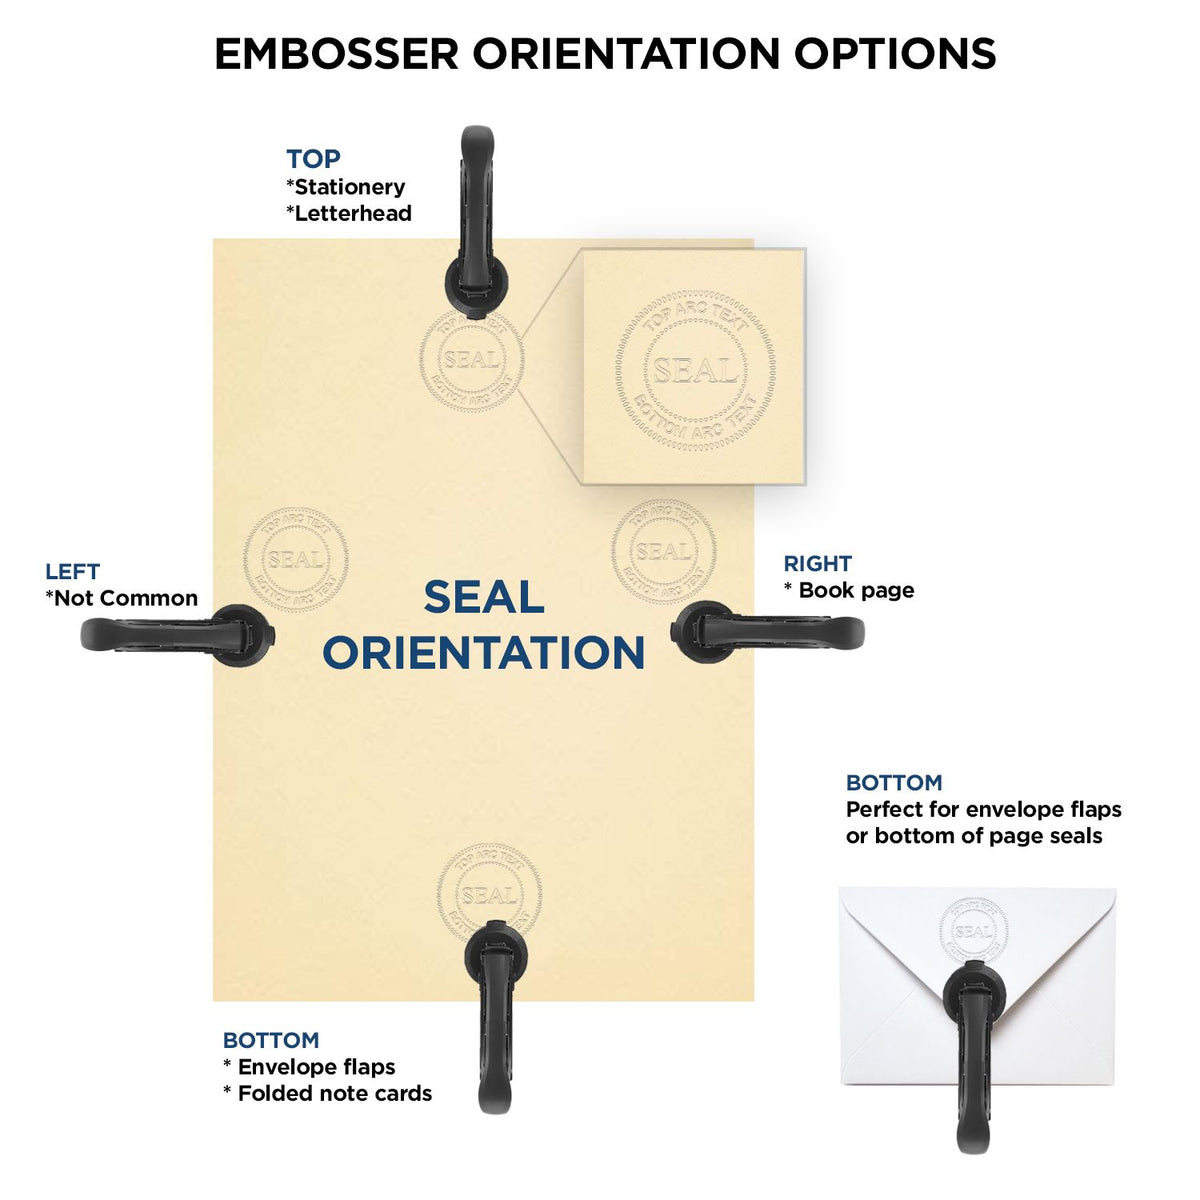 An infographic for the Soft Pocket Guam Landscape Architect Embosser showing embosser orientation, this is showing examples of a top, bottom, right and left insert.